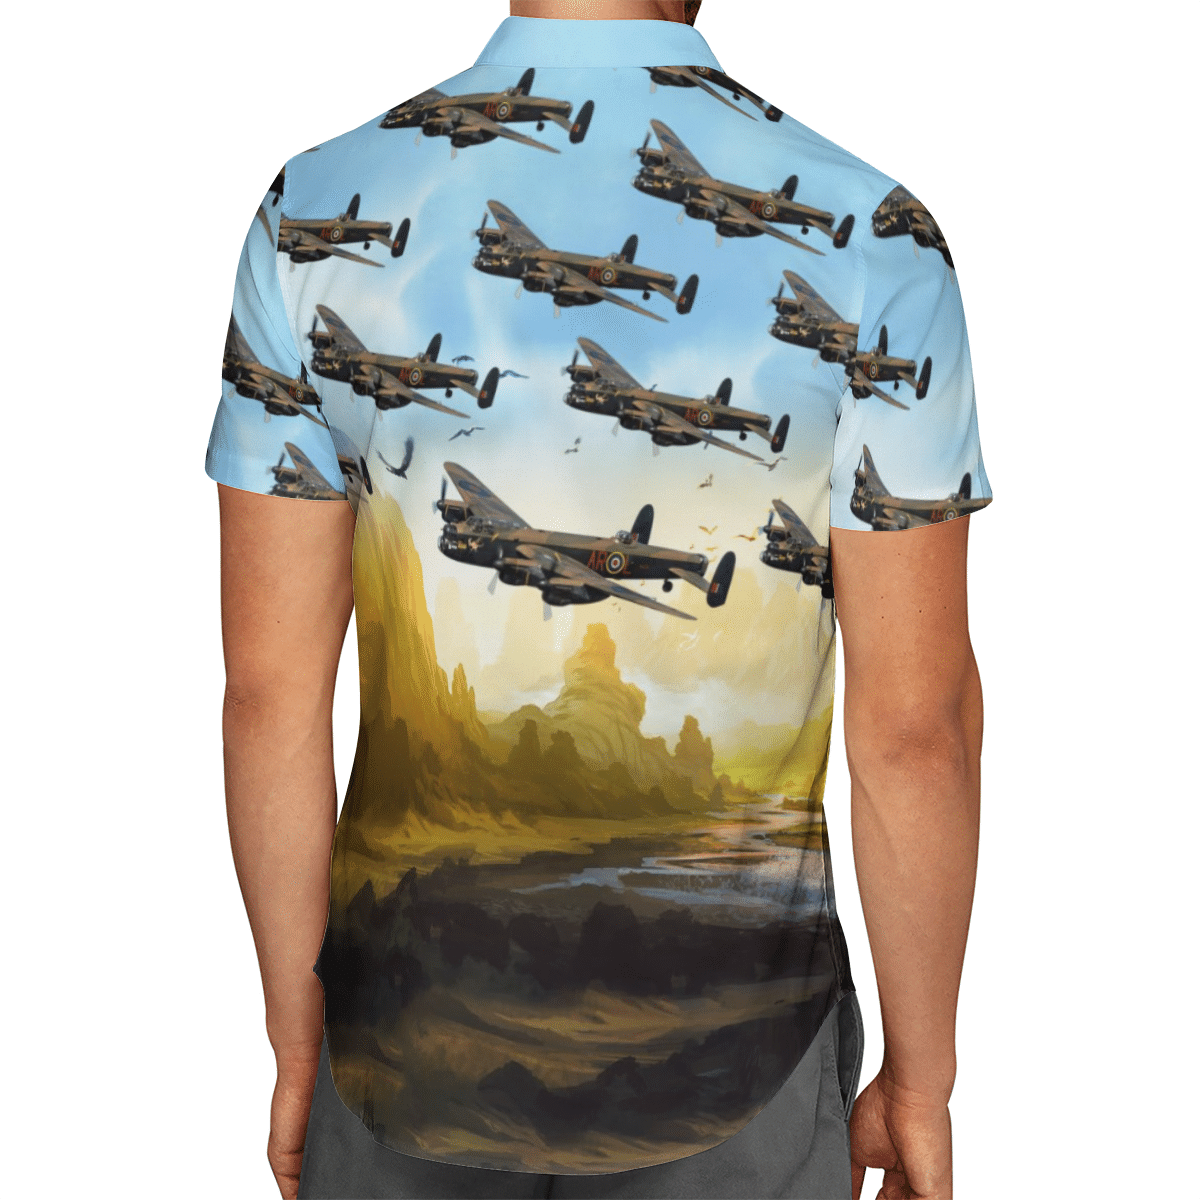 Going to the beach with a quality shirt 151